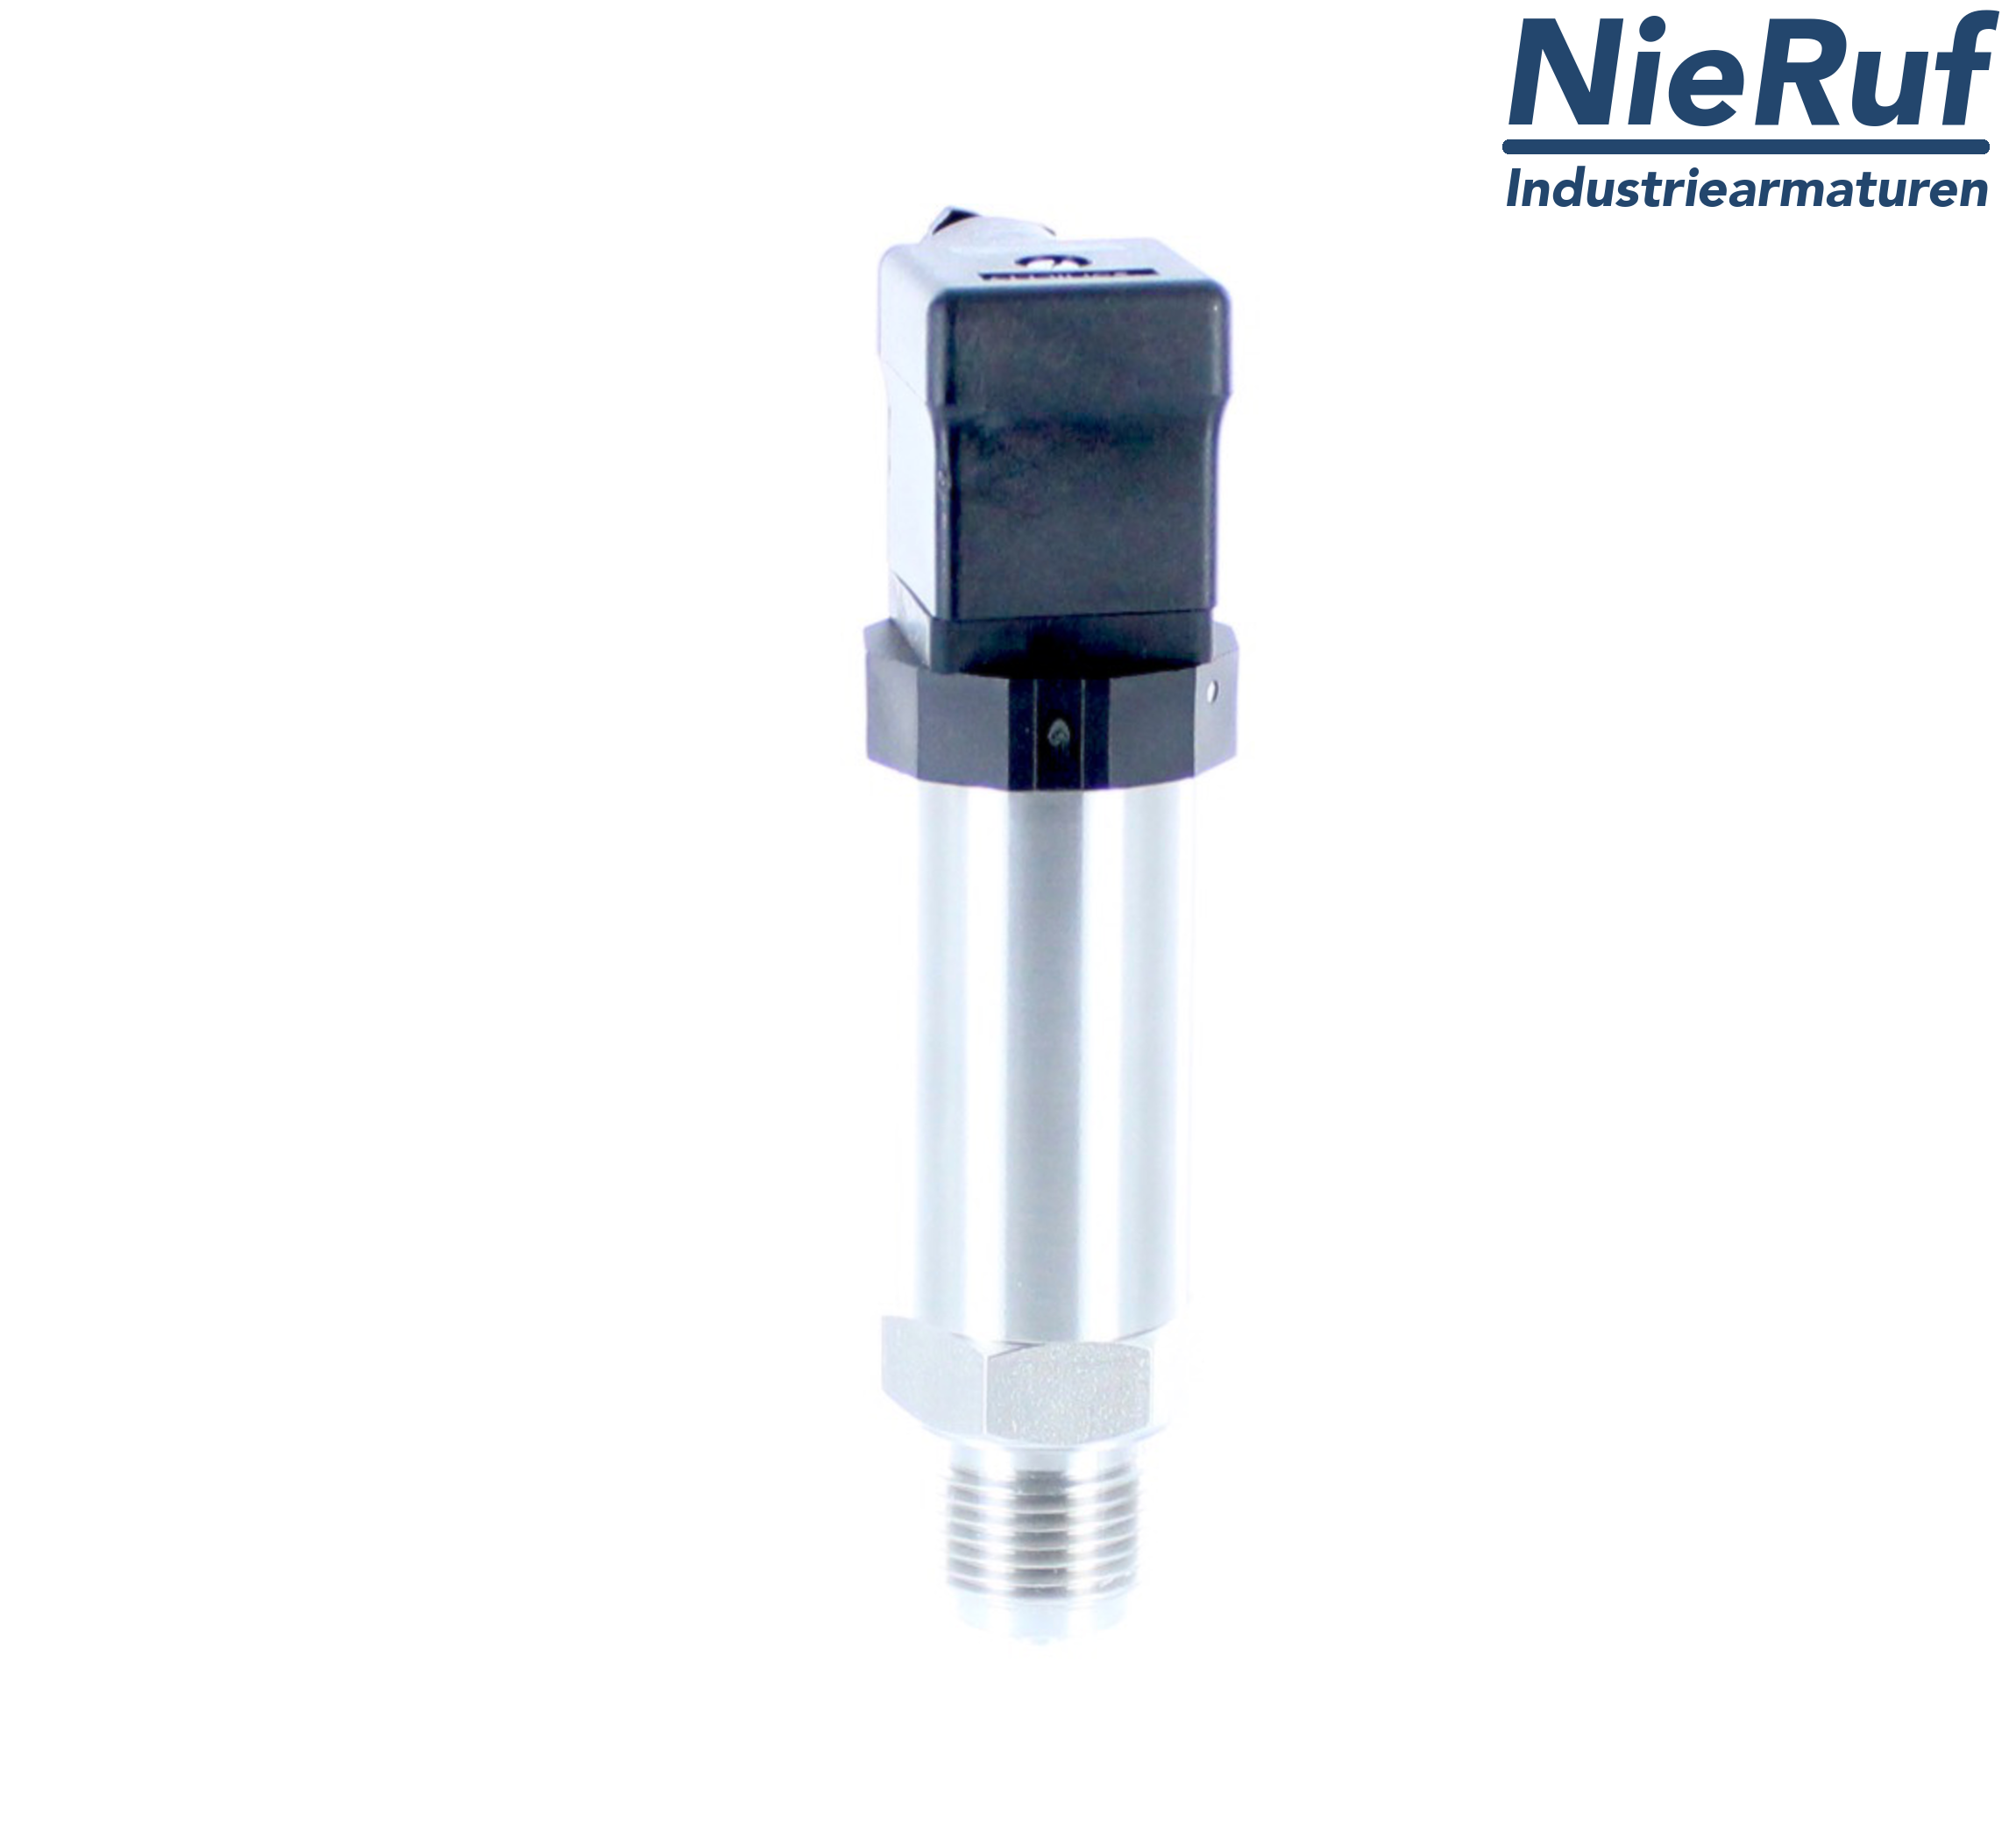 pressure sensor G 1/2" B DS01 stainless steel 2-wire: 4-20mA FPM 0,0 - 100,0 bar